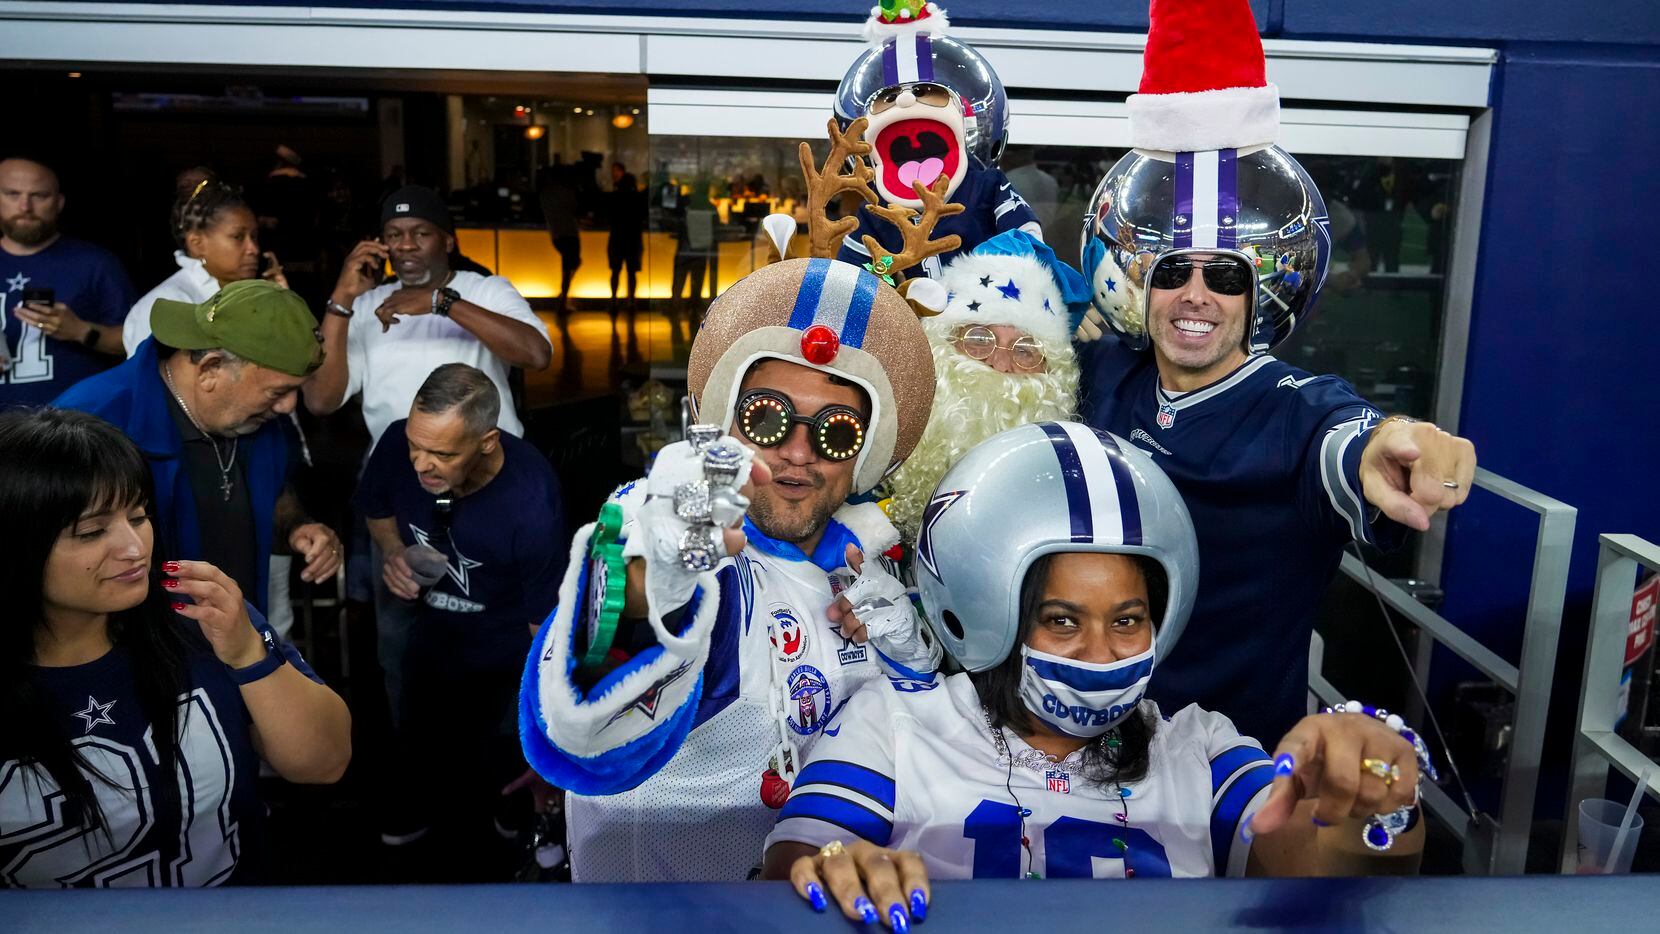 Dallas Cowboys fans cheer as the team warms up before an NFL football game against the Washington Football Team at AT&T Stadium on Sunday, Dec. 26, 2021, in Arlington.